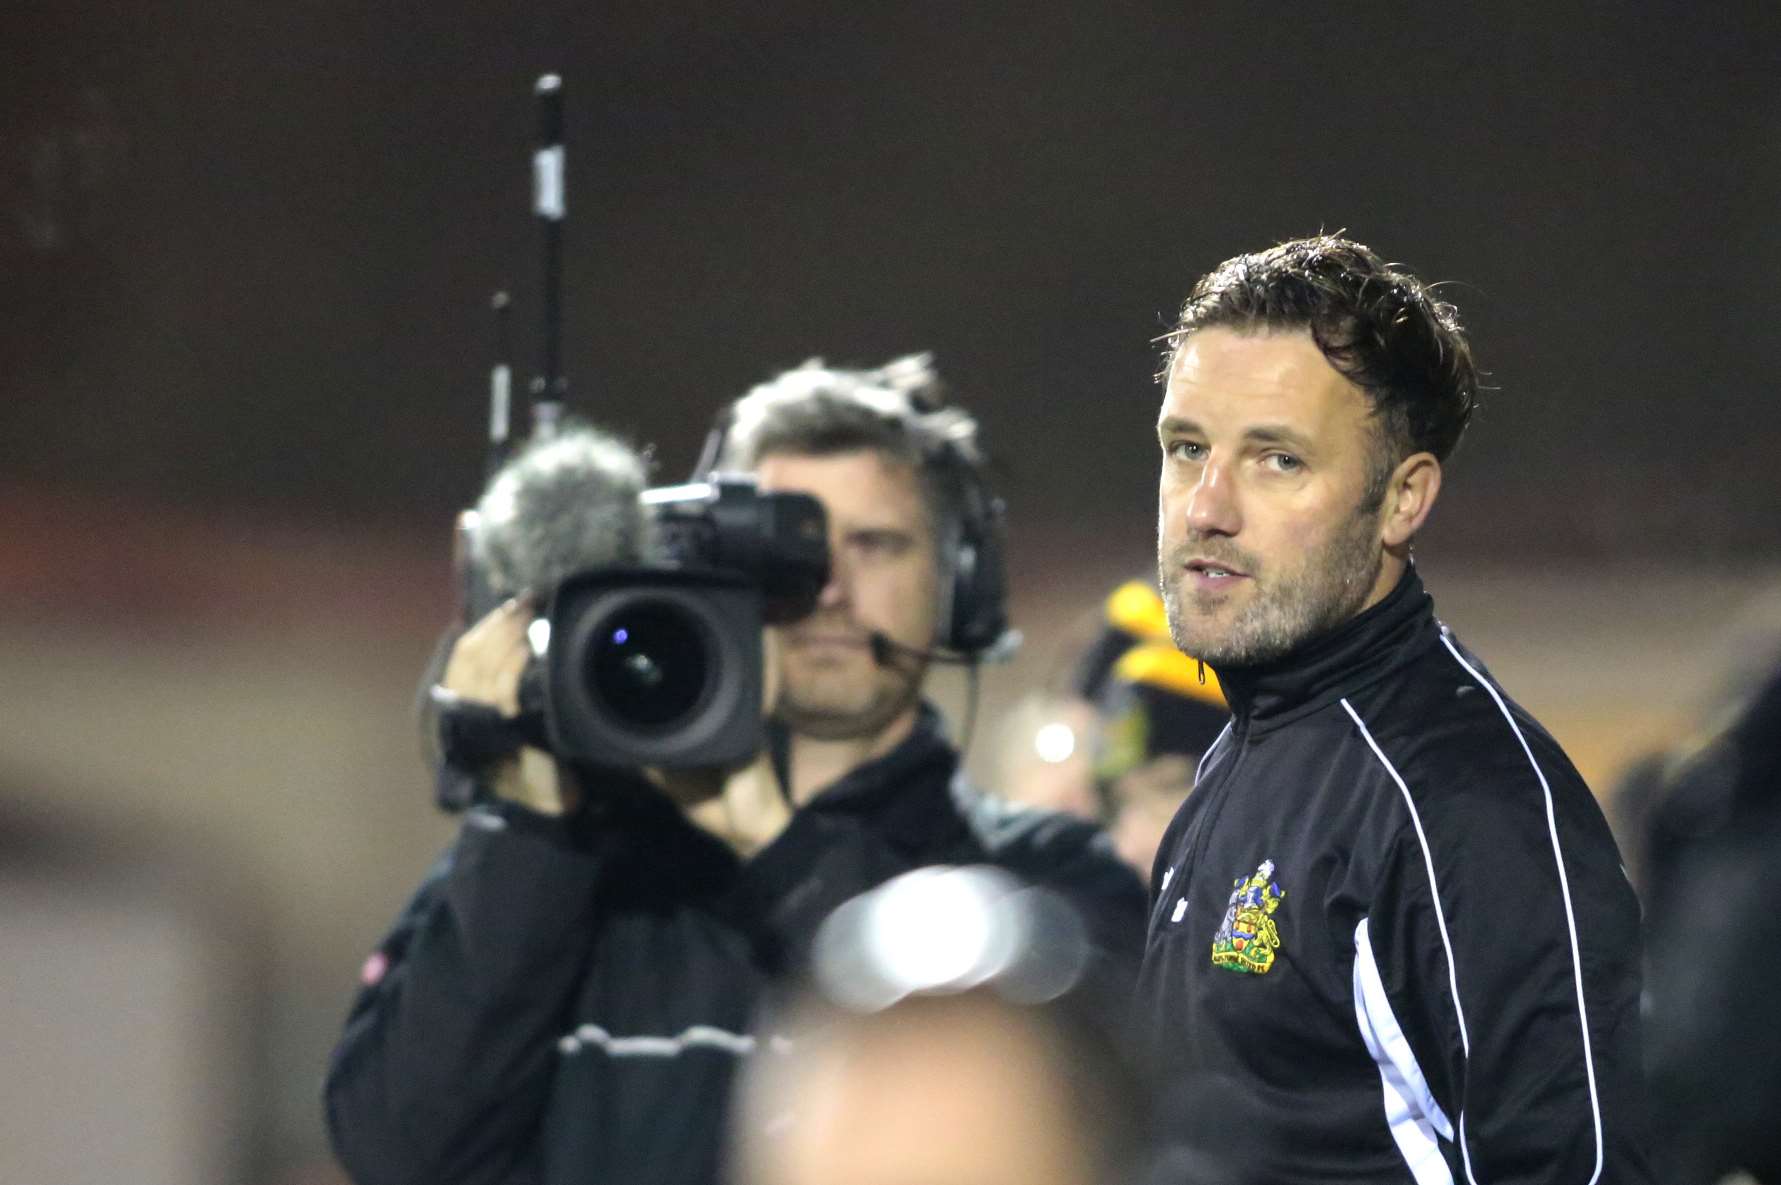 Maidstone and manager Jay Saunders will be back on the telly